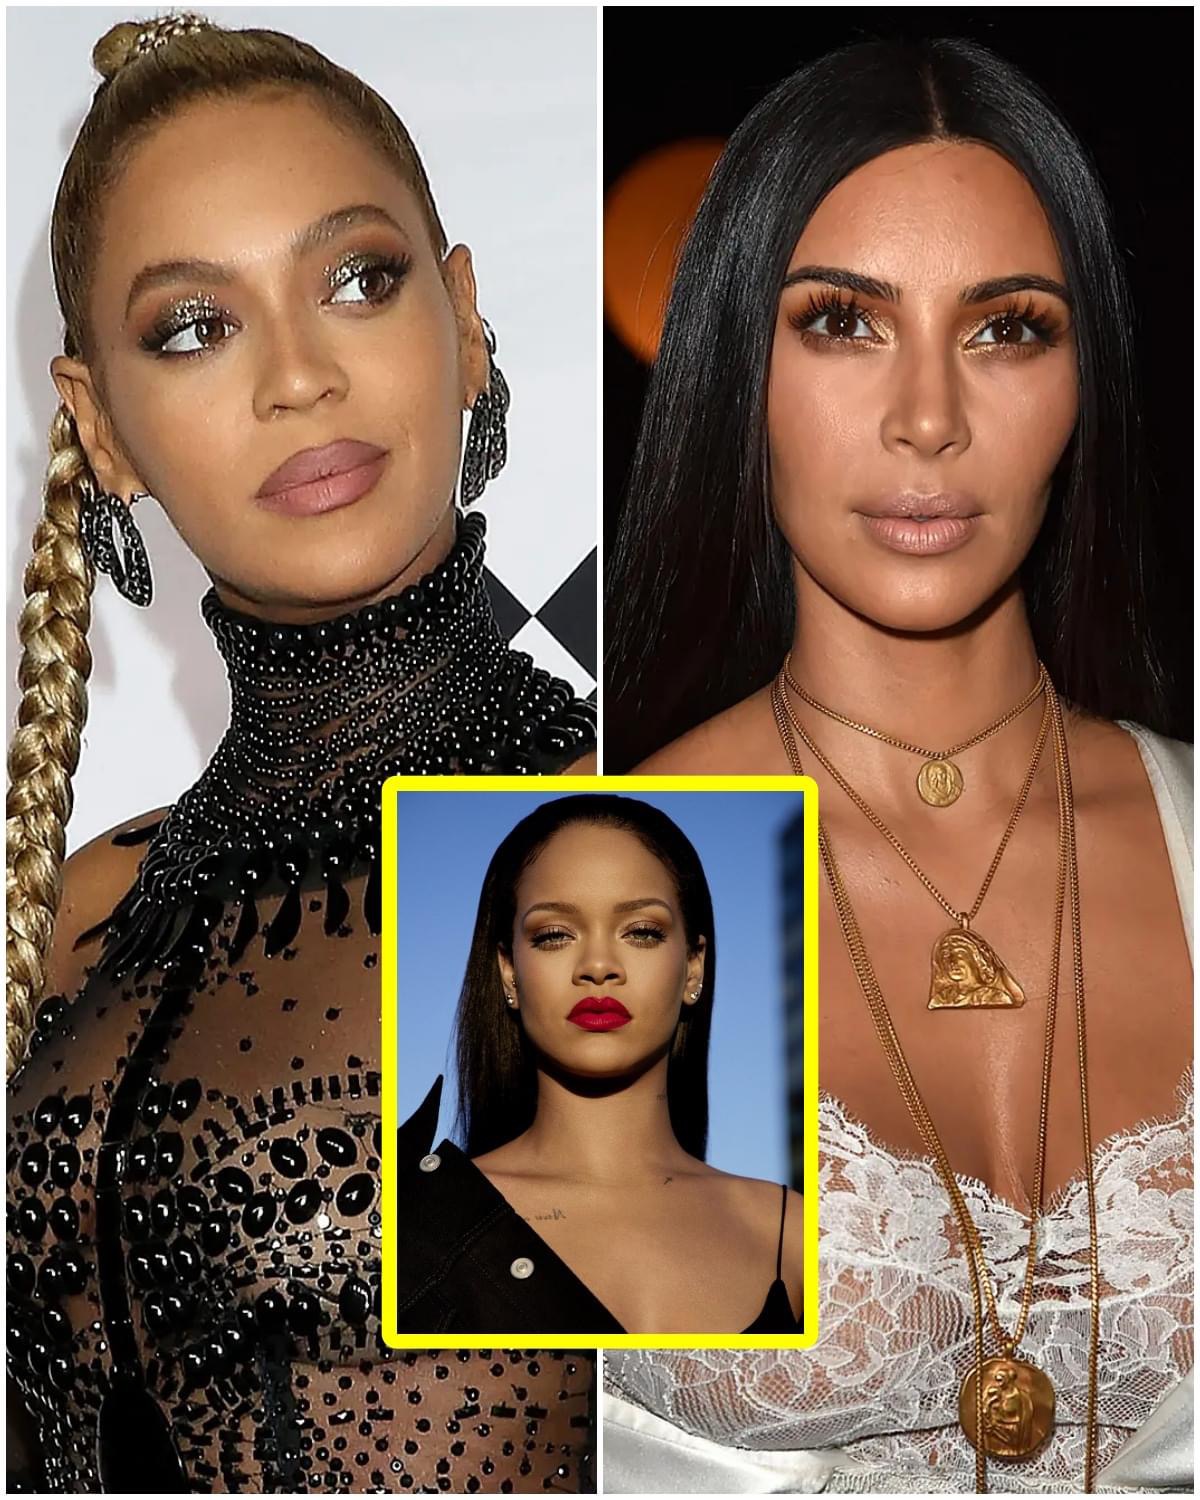 Kim Kardashian and Beyoncé join forces, vow to keep Rihanna away from their husbands